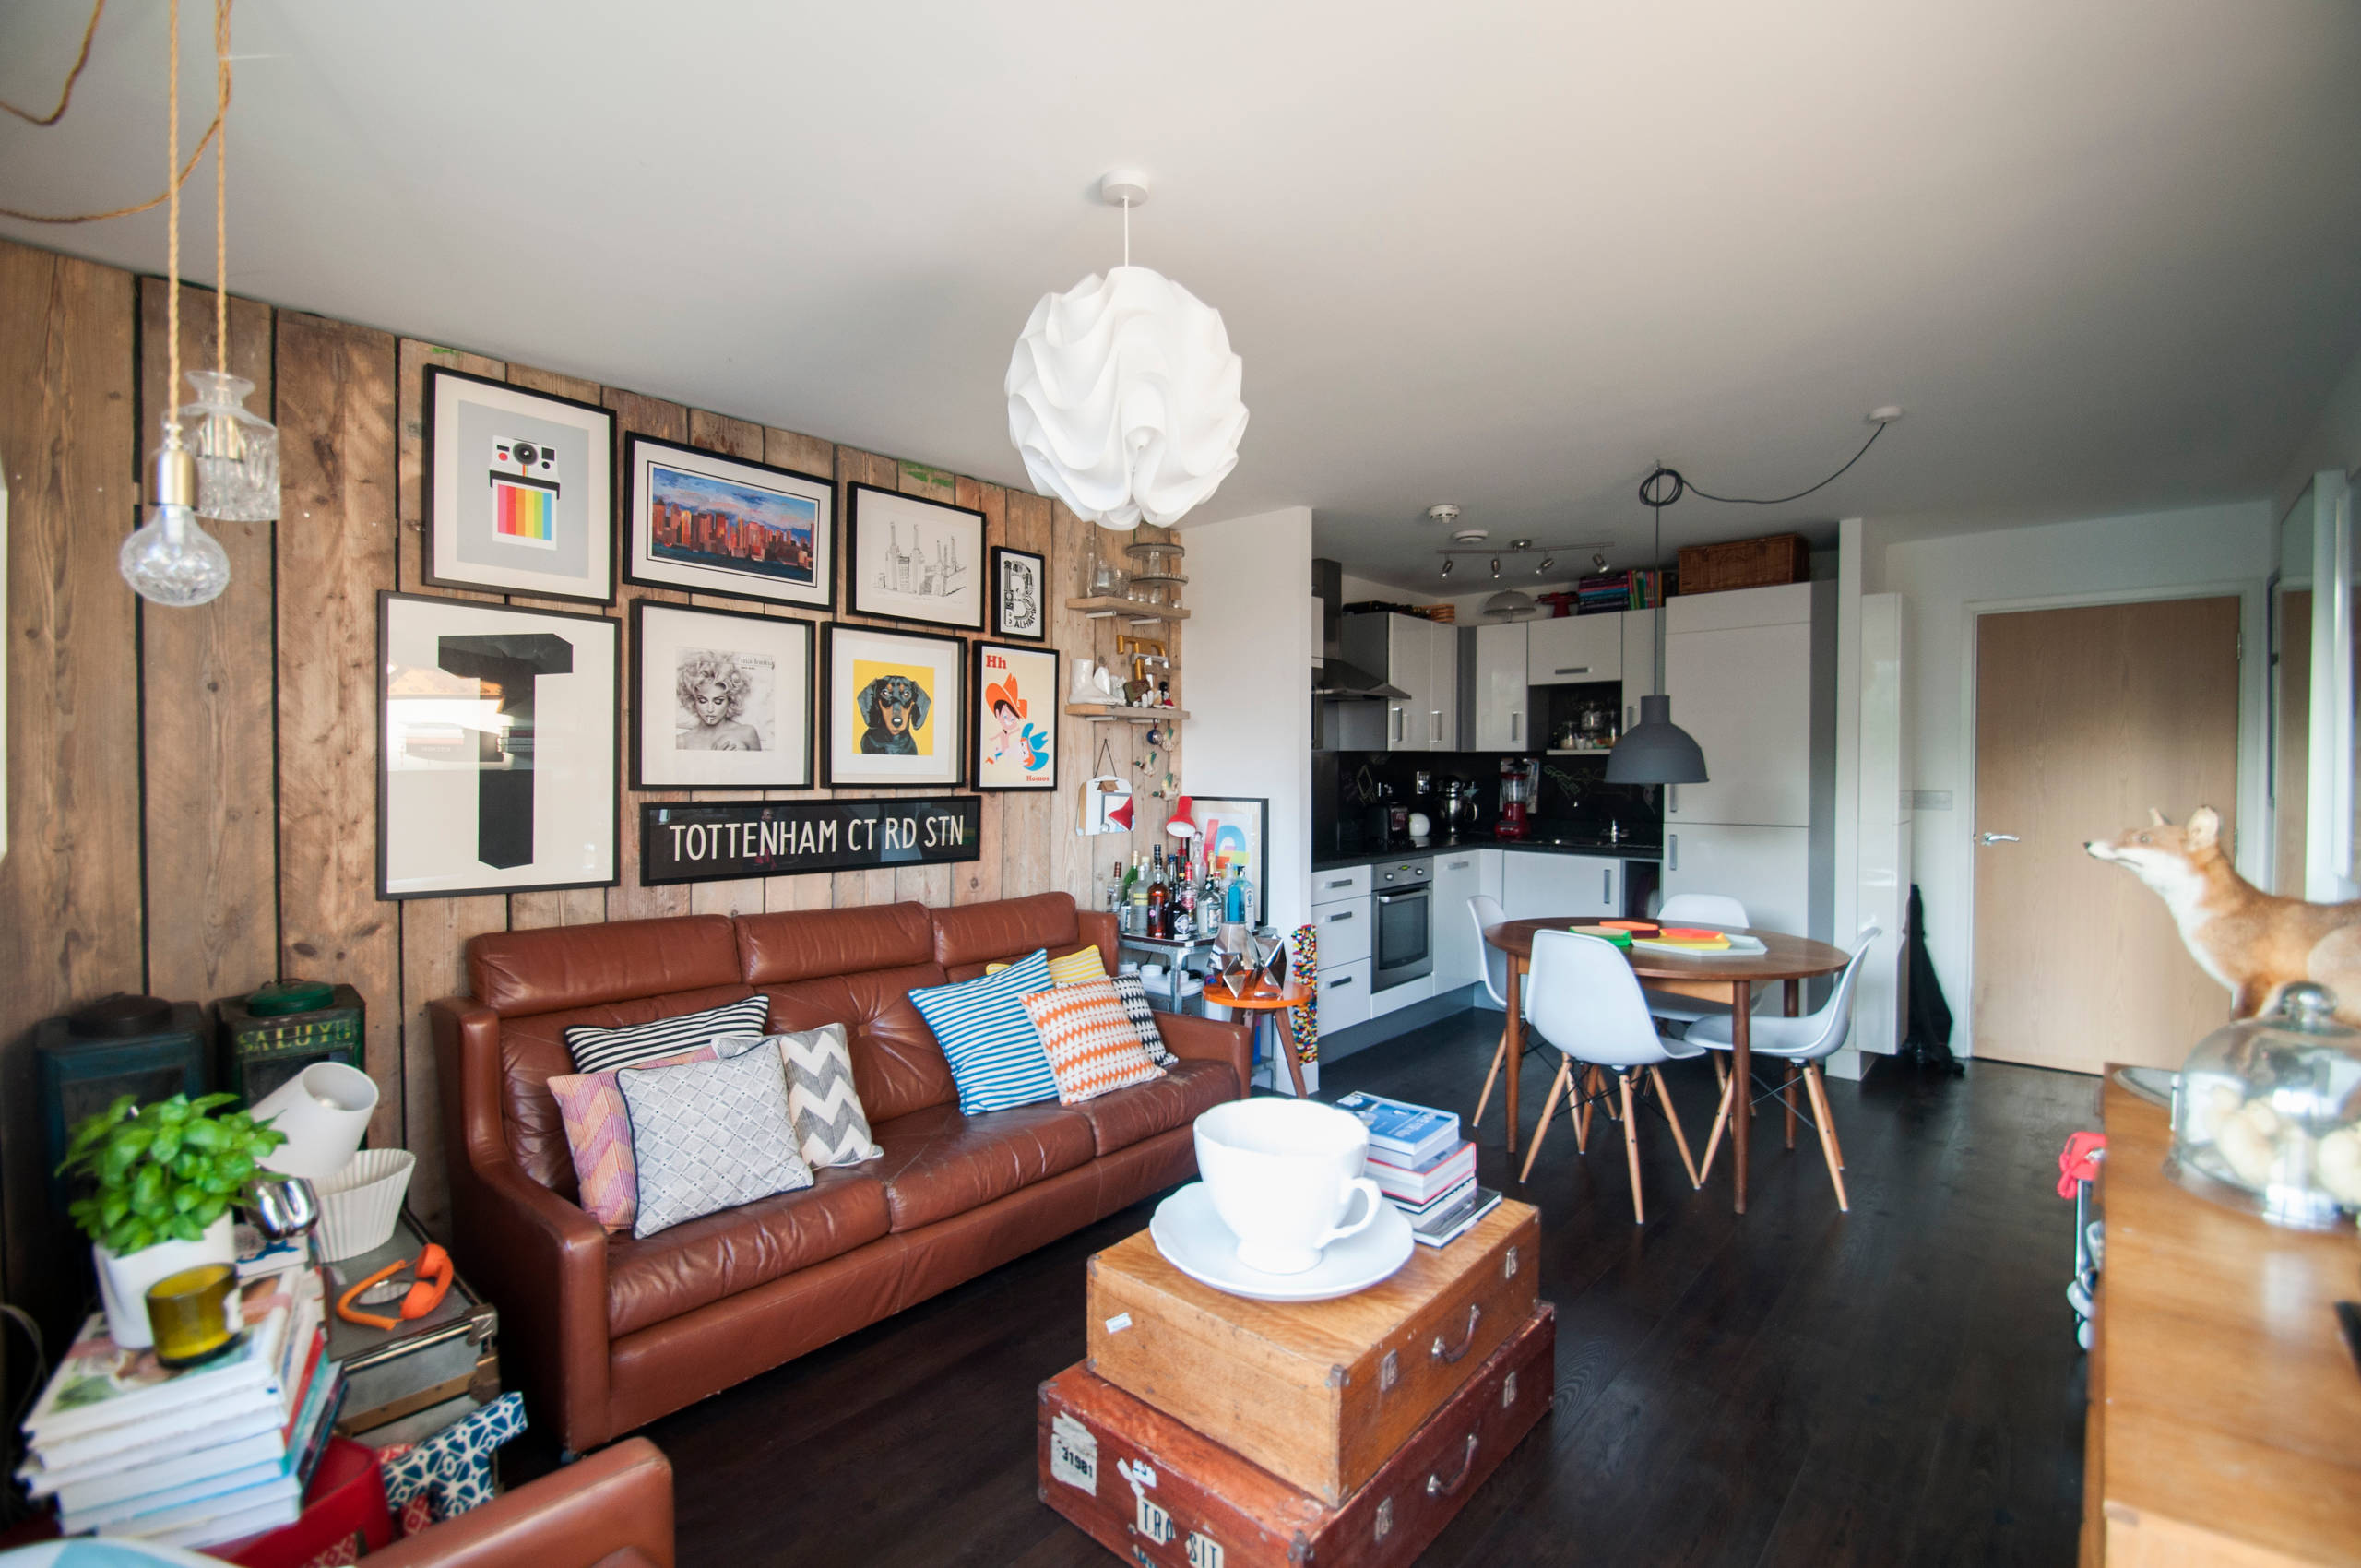 Decorating: Is Your Home Ready for a 1970s Revival? | Houzz UK